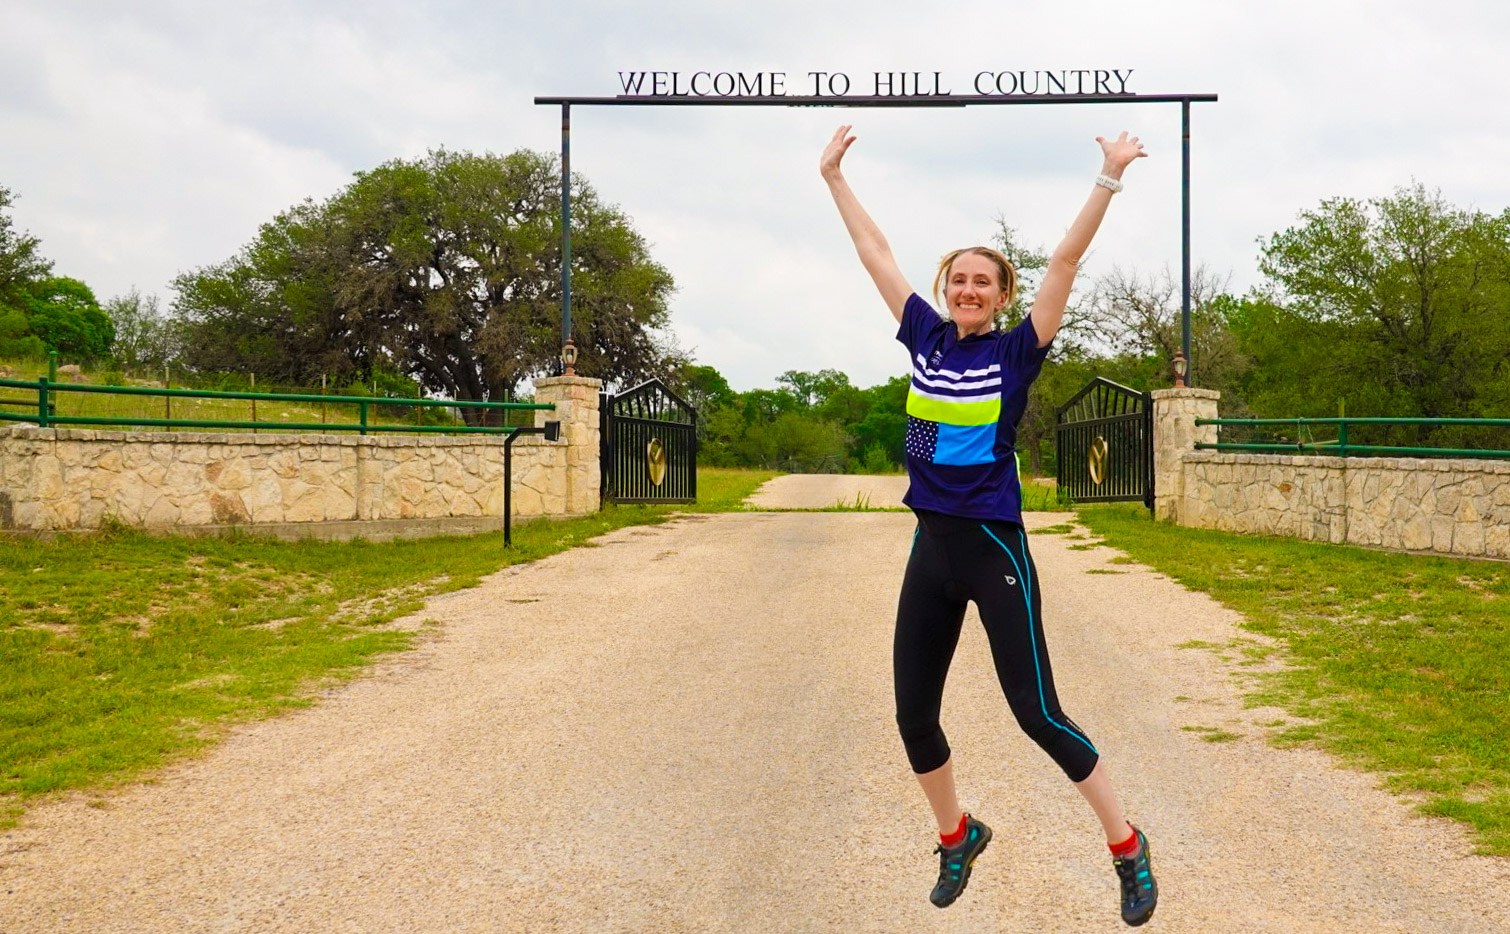 guest jumping with joy in front of the Texas Hill Contry rod iron sign in her Trek Travel jersey